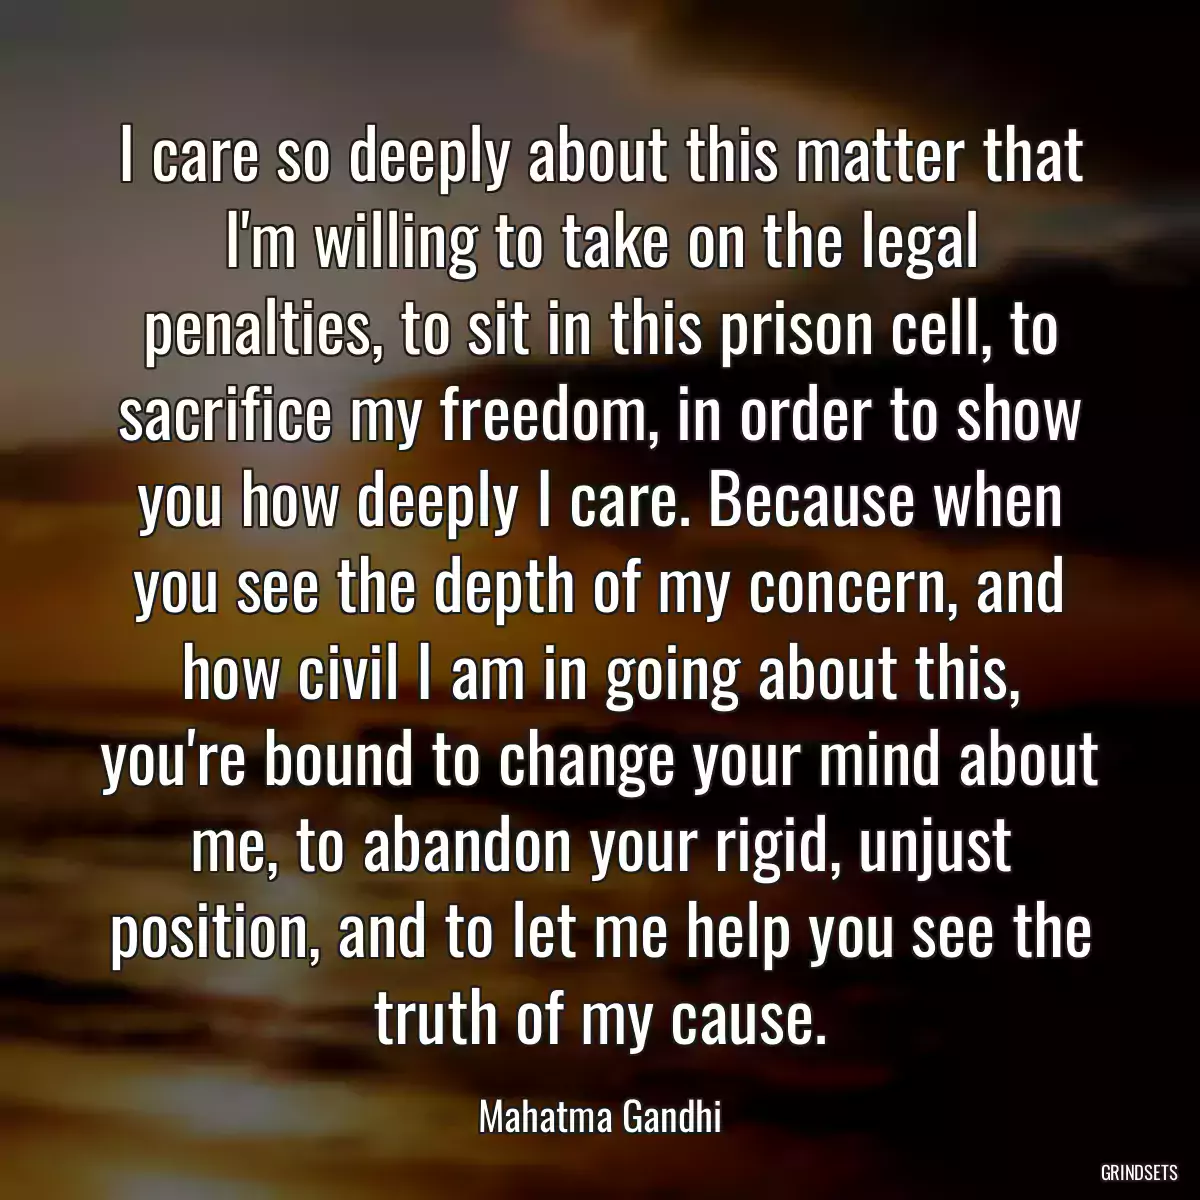 I care so deeply about this matter that I\'m willing to take on the legal penalties, to sit in this prison cell, to sacrifice my freedom, in order to show you how deeply I care. Because when you see the depth of my concern, and how civil I am in going about this, you\'re bound to change your mind about me, to abandon your rigid, unjust position, and to let me help you see the truth of my cause.